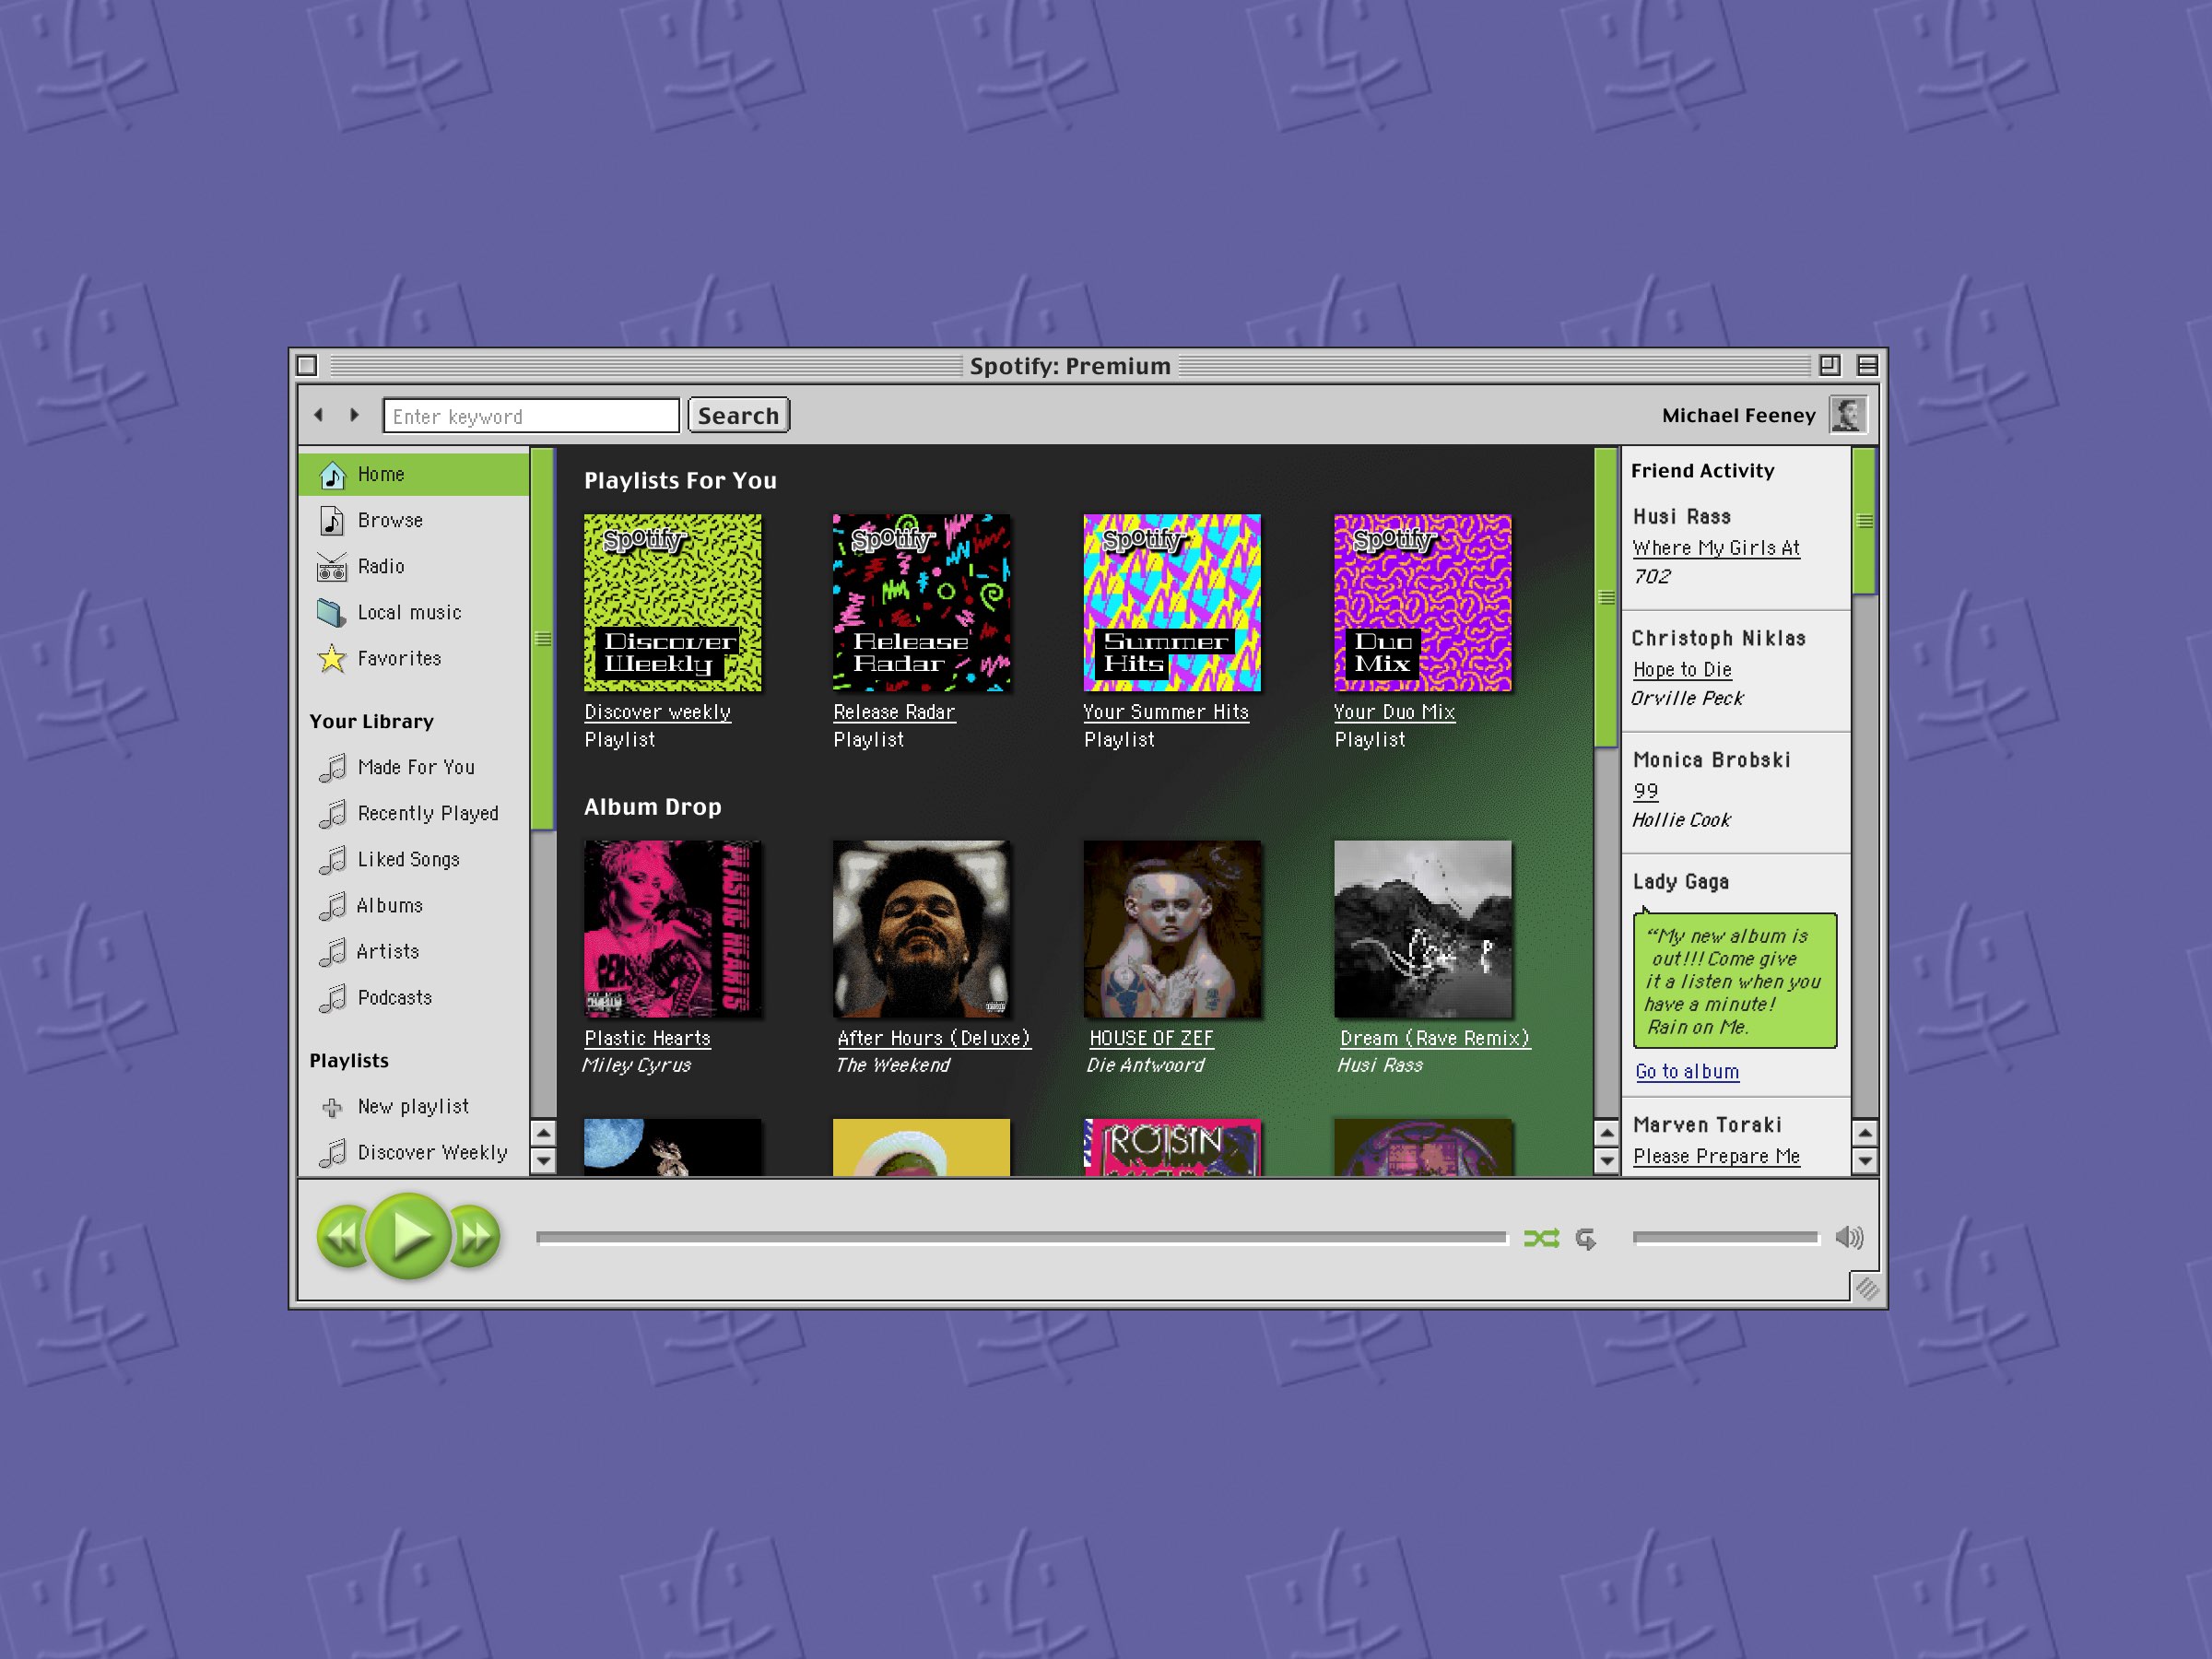 A mockup by graphic designer Michael Feeney reimagining what Spotify for macOS would have looked liked in the Mac OS 9 era back in 1999